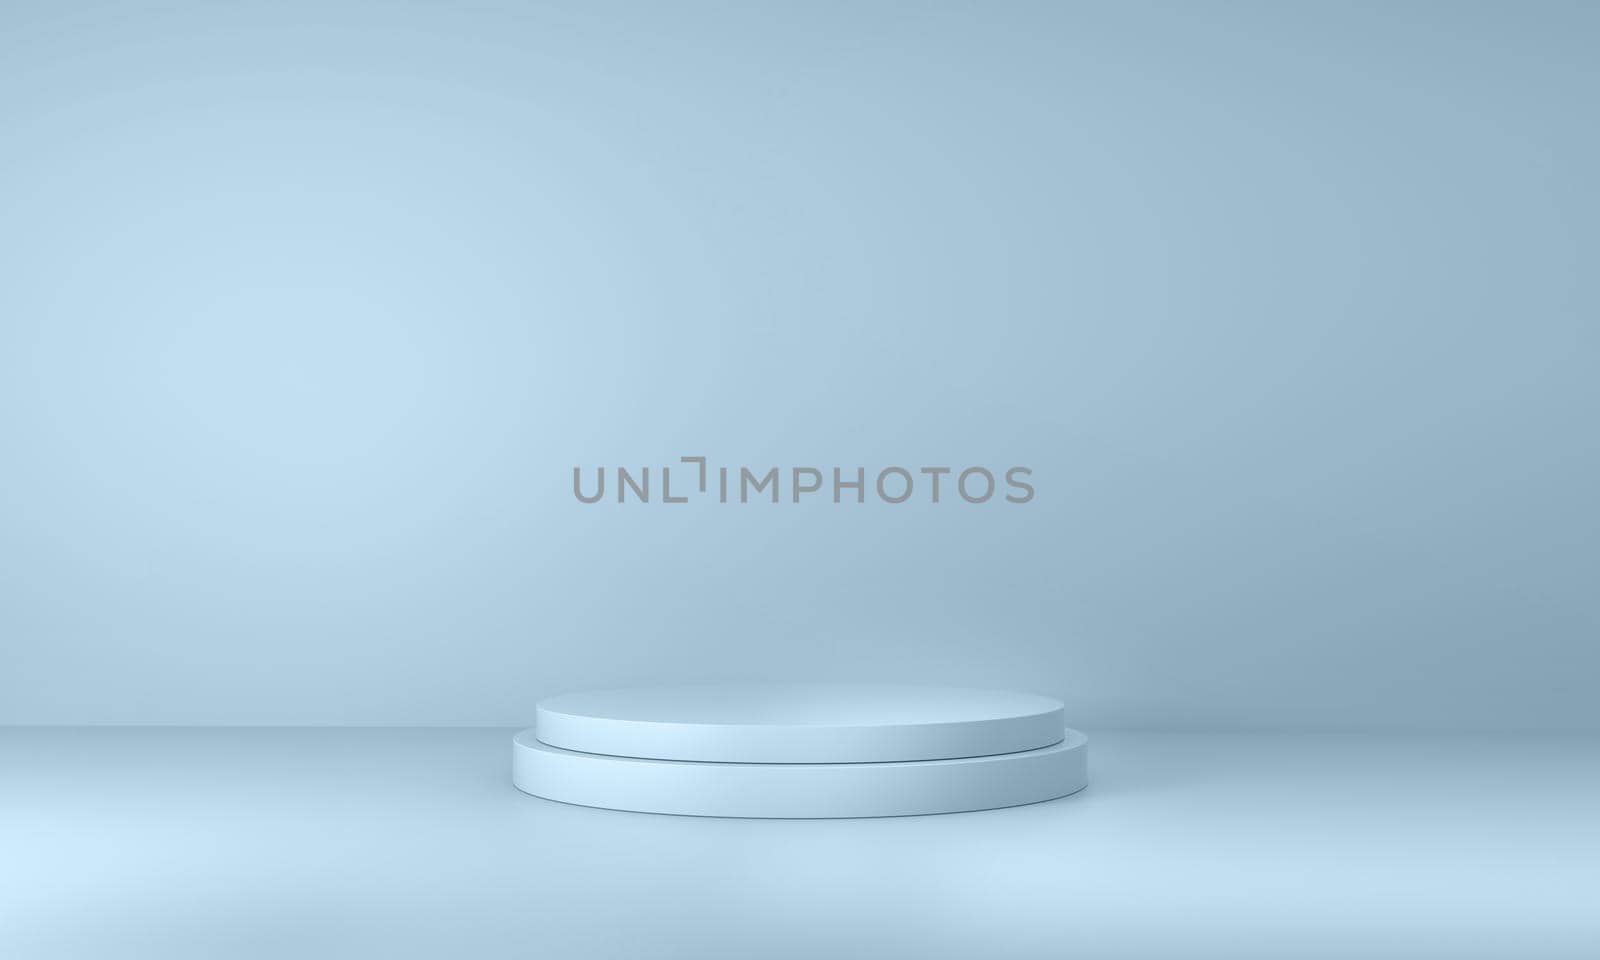 Mockup podium for product display, 3d rendering of showroom or exhibition premium in blue background.